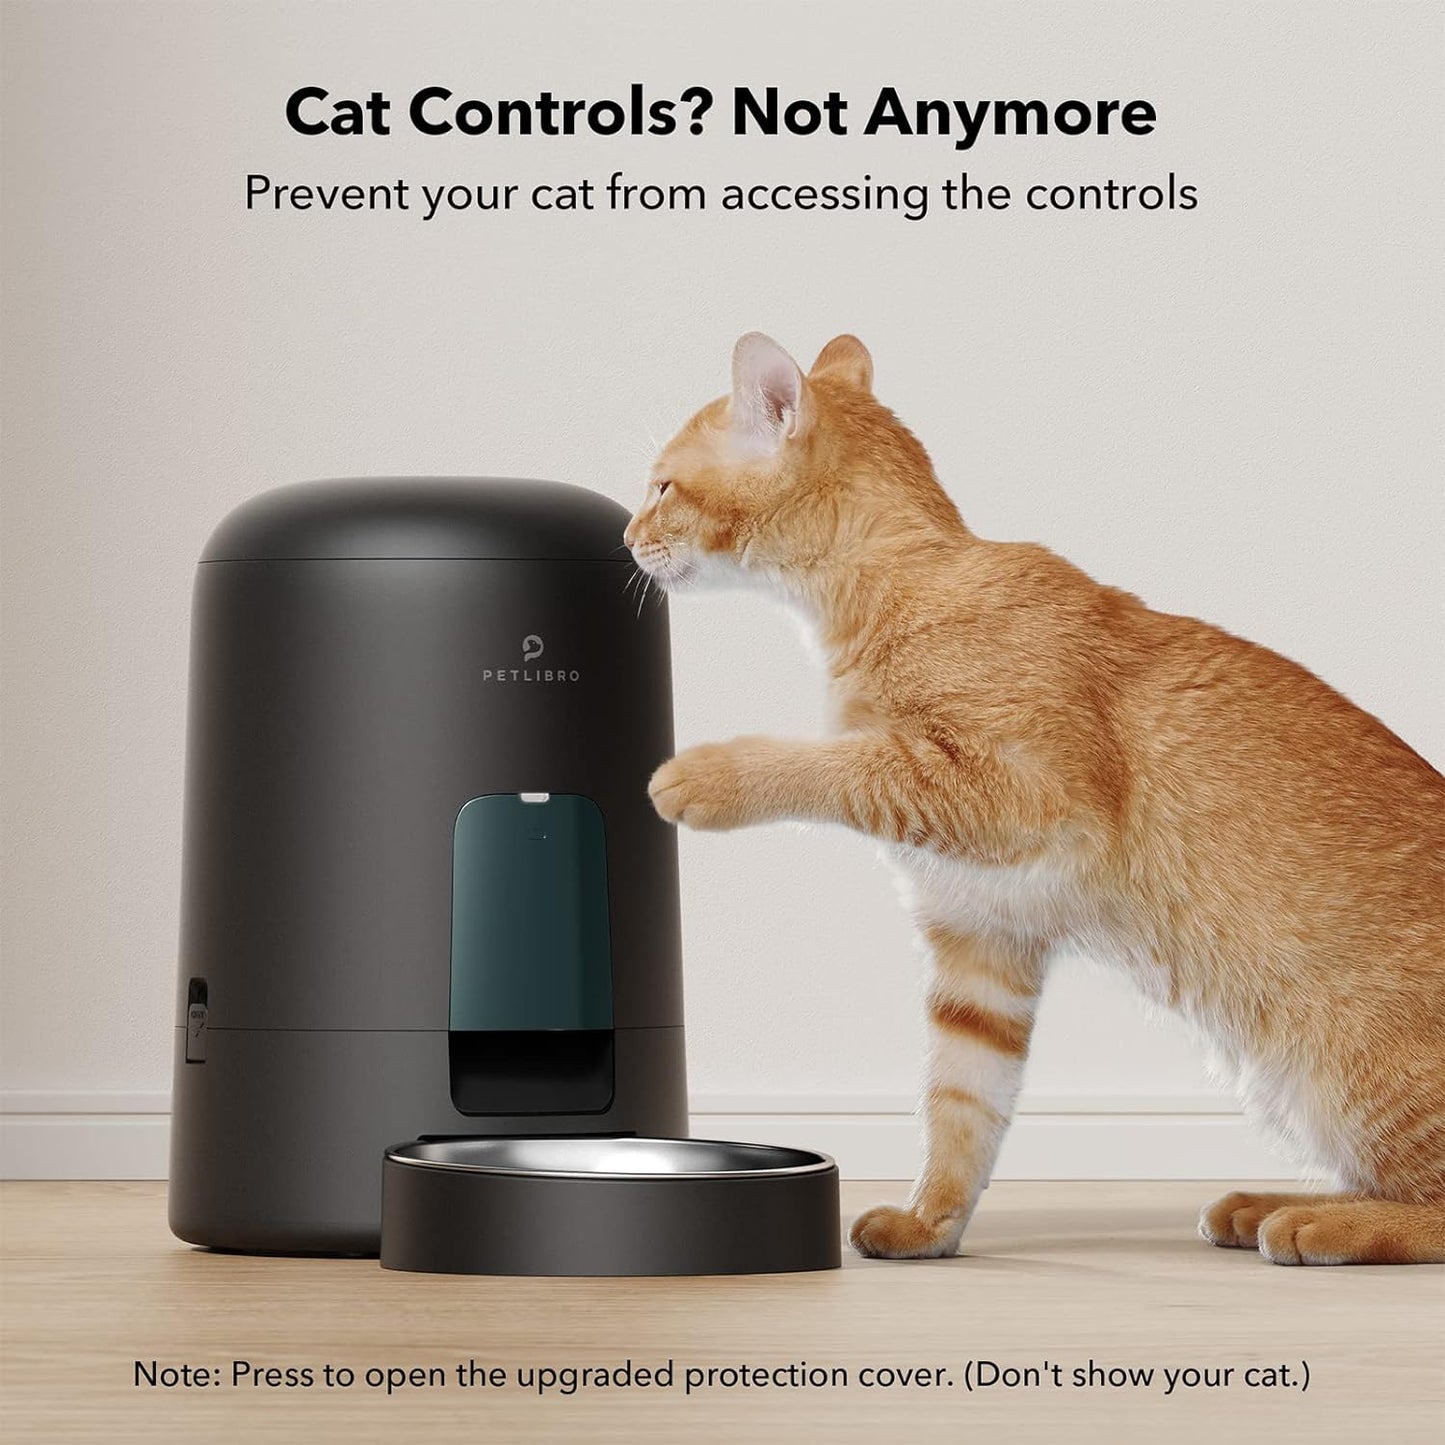 Automatic Cat Feeder, Automatic Cat Food Dispenser Battery-Operated with 180-Day Battery Life, AIR Pet Feeder for Cat & Dog, Timed Cat Feeder Program 1-6 Meals Control, 2L Auto Cat Feeder